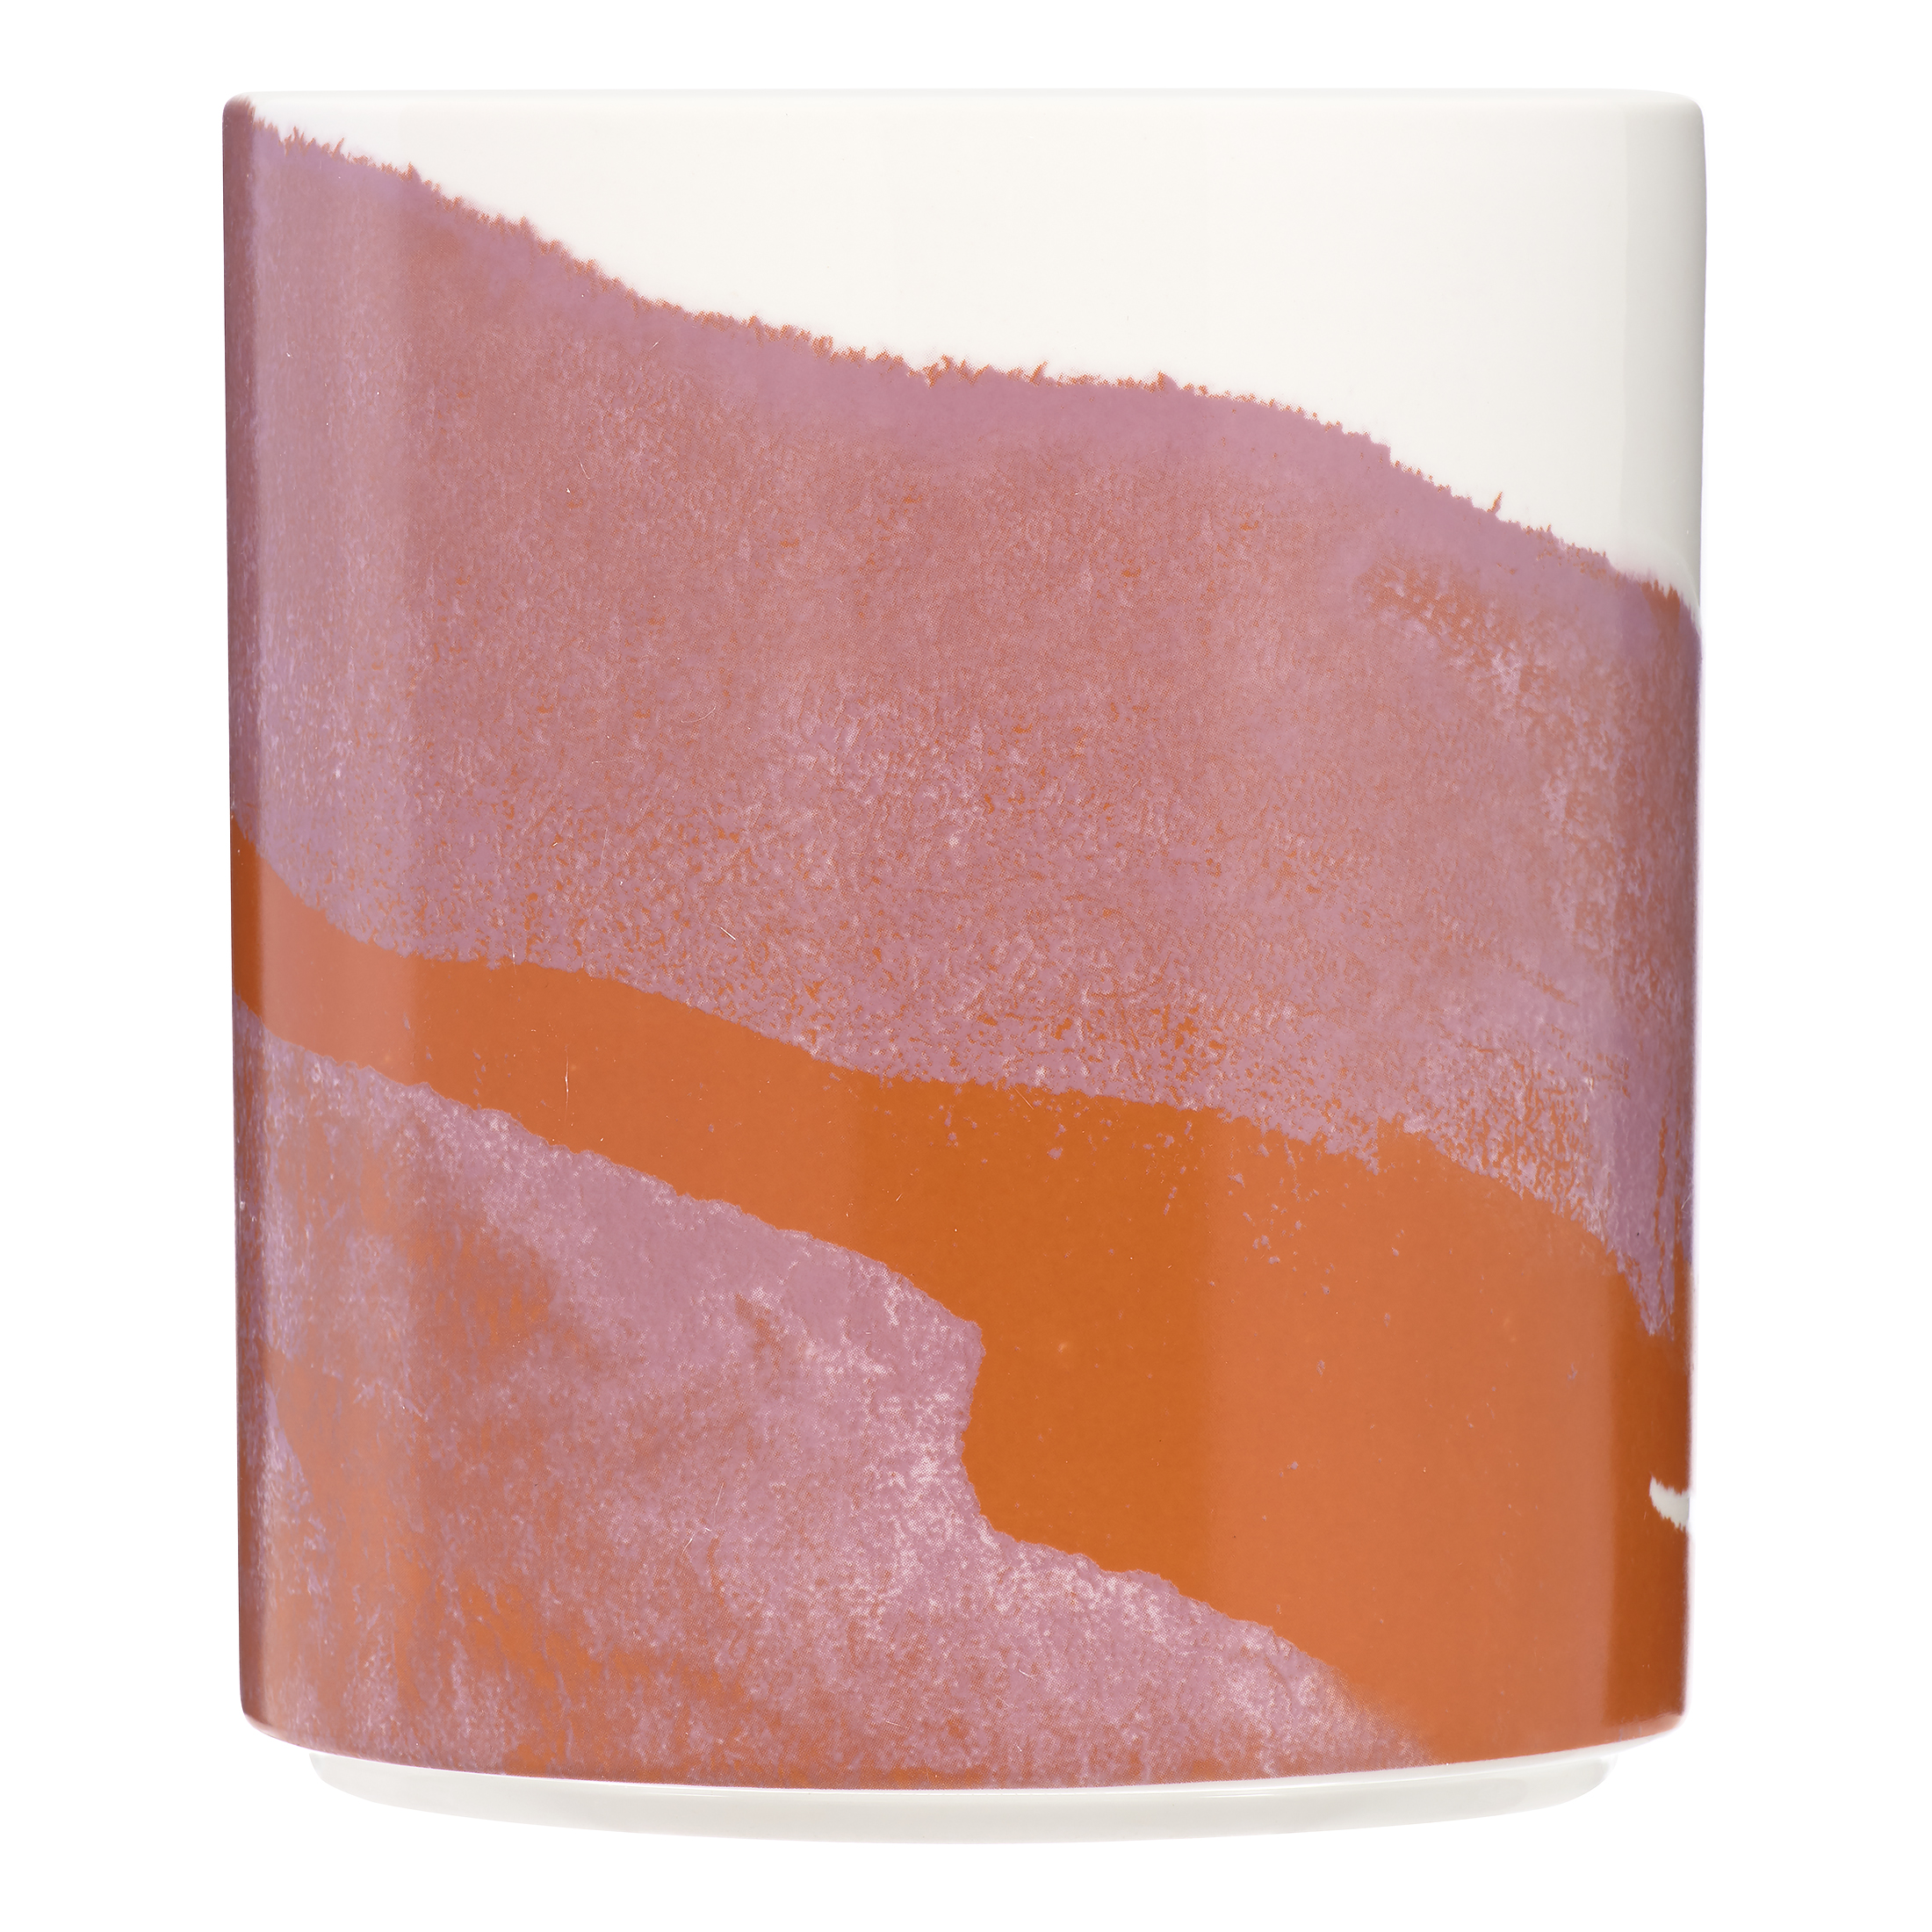 Abstract Marble Utensil Holder by Drew Barrymore Flower Home - image 3 of 8